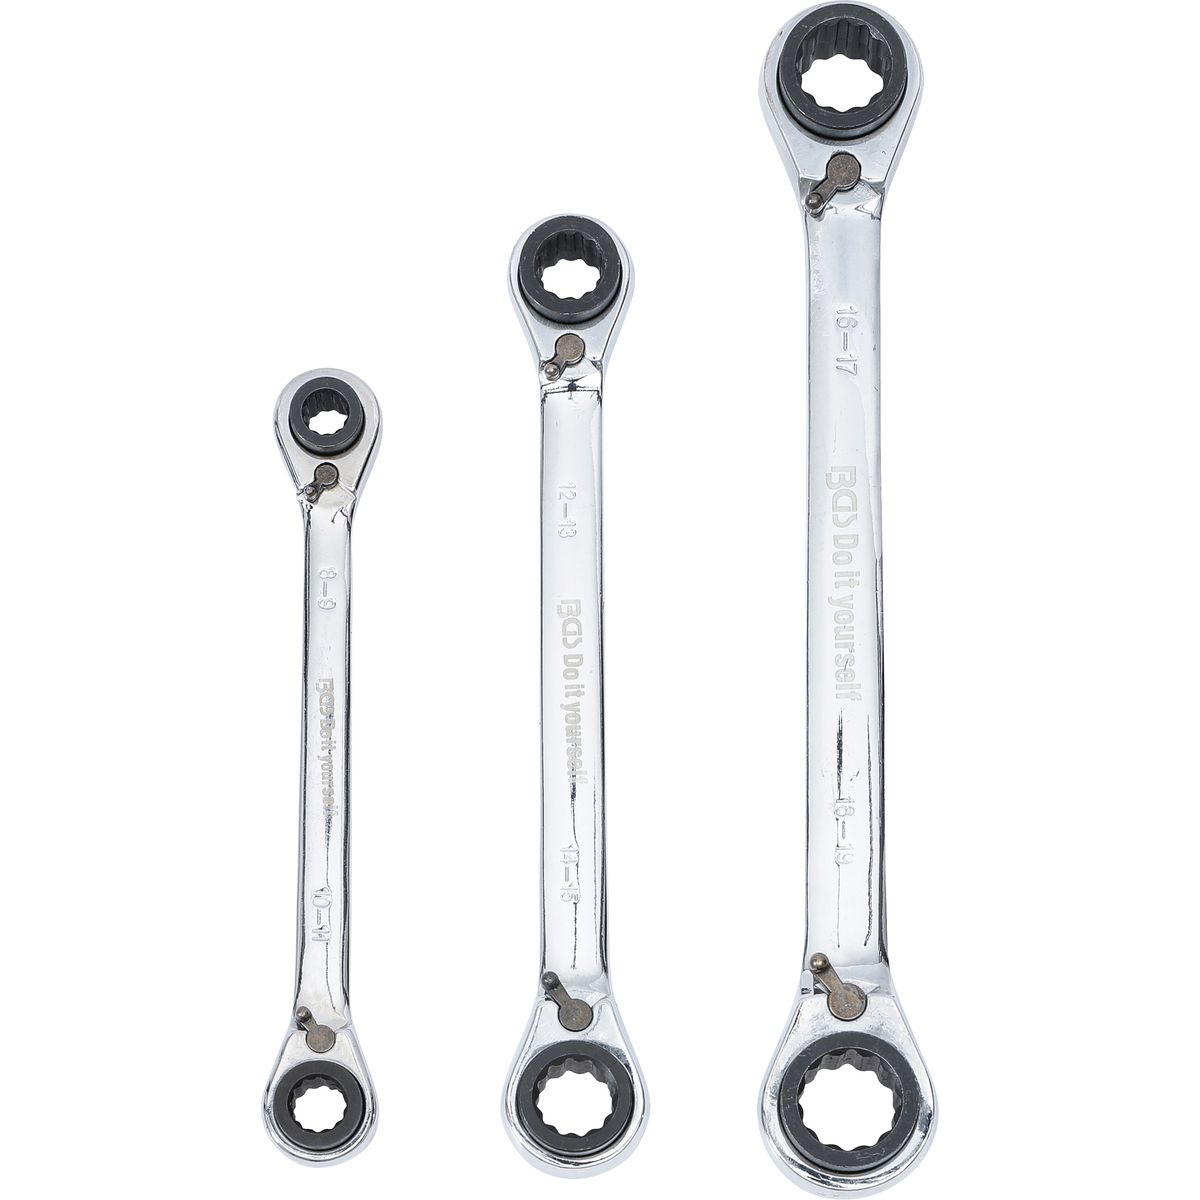 Double Ended Ratchet Wrench Set | 4-in-1 | 8 x 9 - 18 x 19 mm